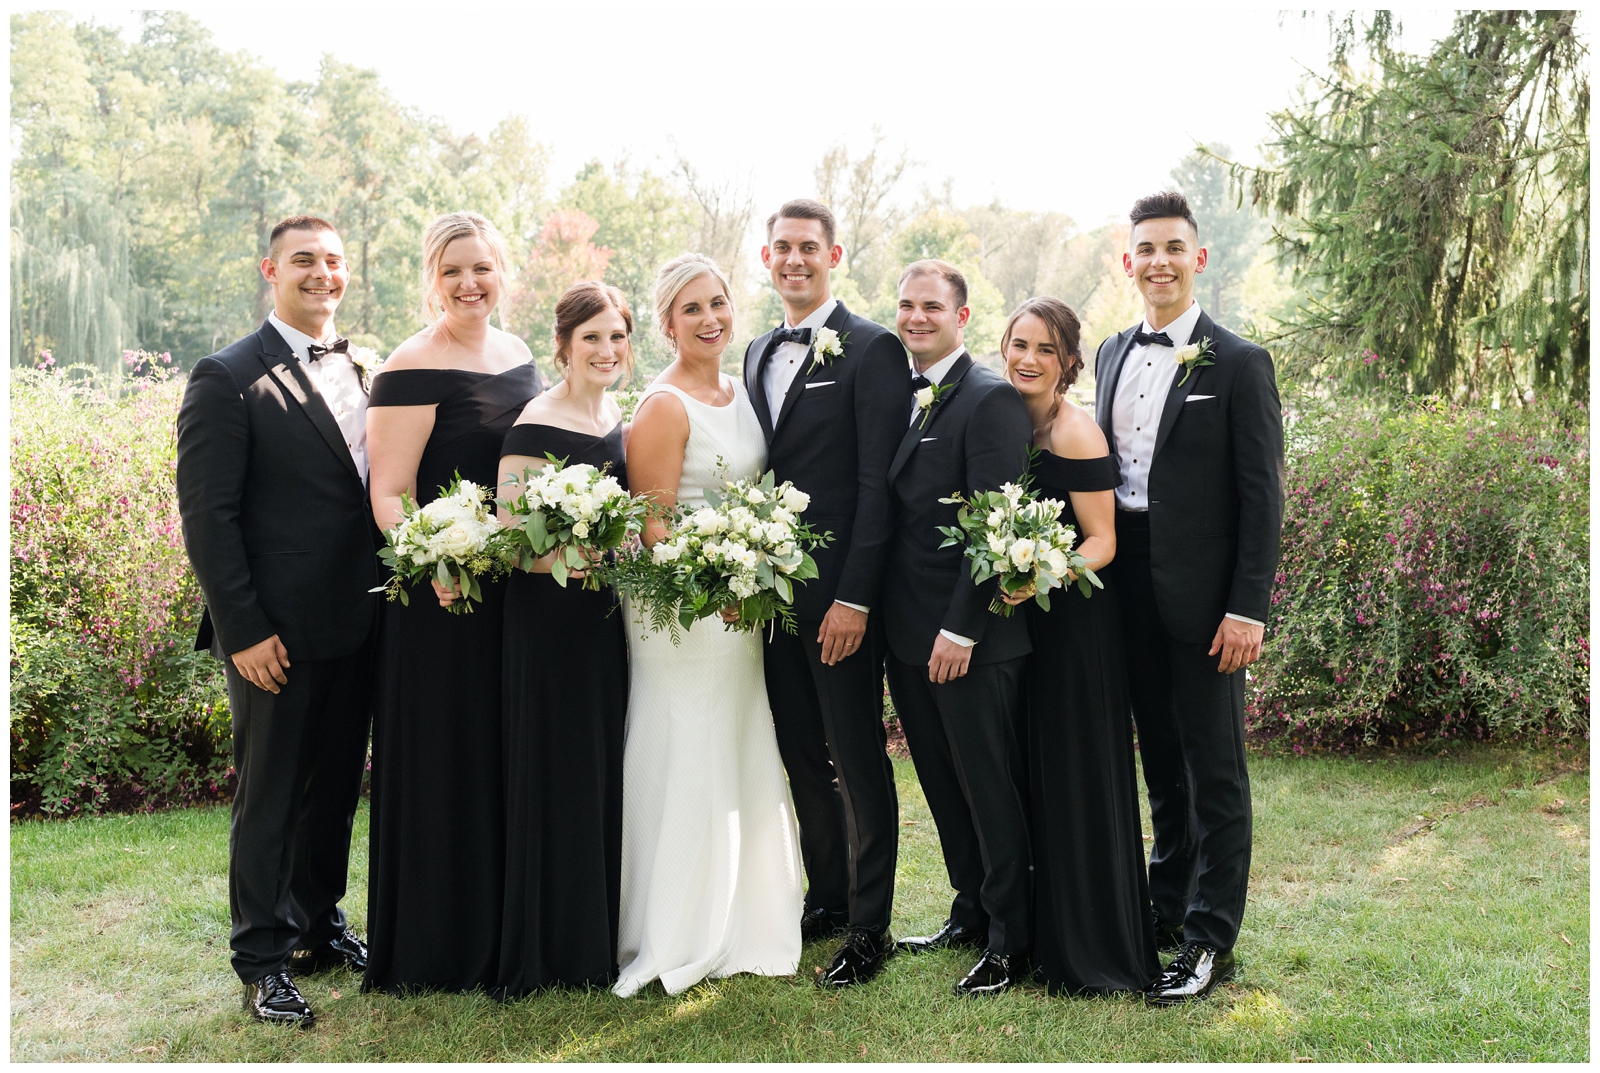 bridesmaids in black gowns and groomsmen in tuxes surround bride and groom at Gervasi Vineyard